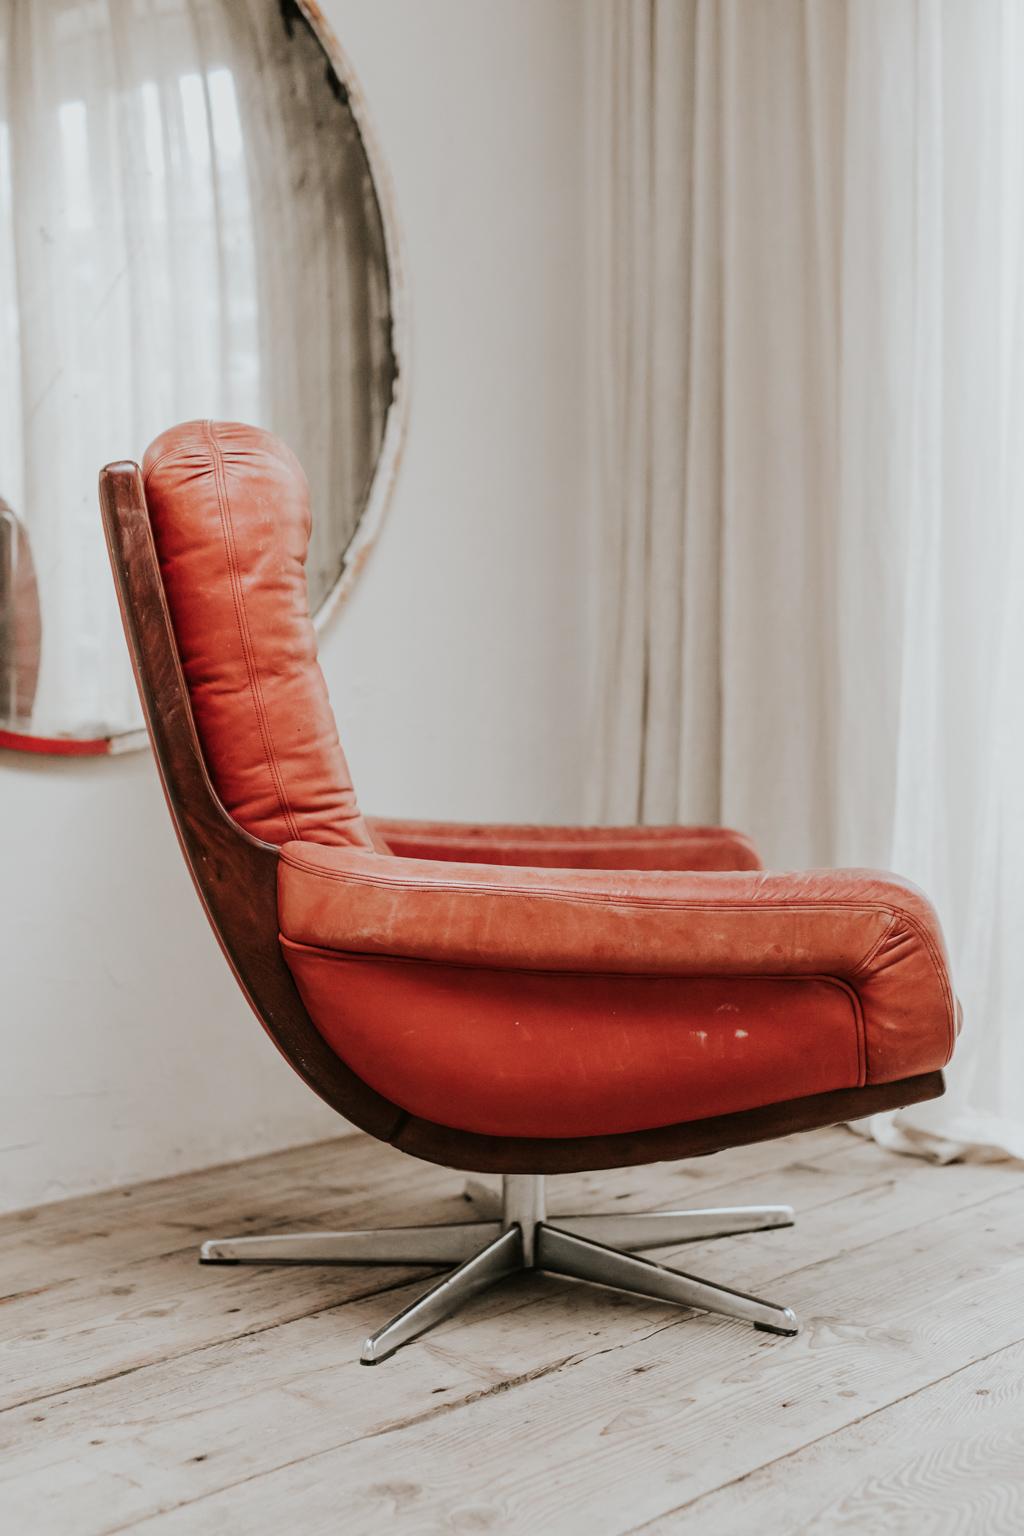 red swivel chair